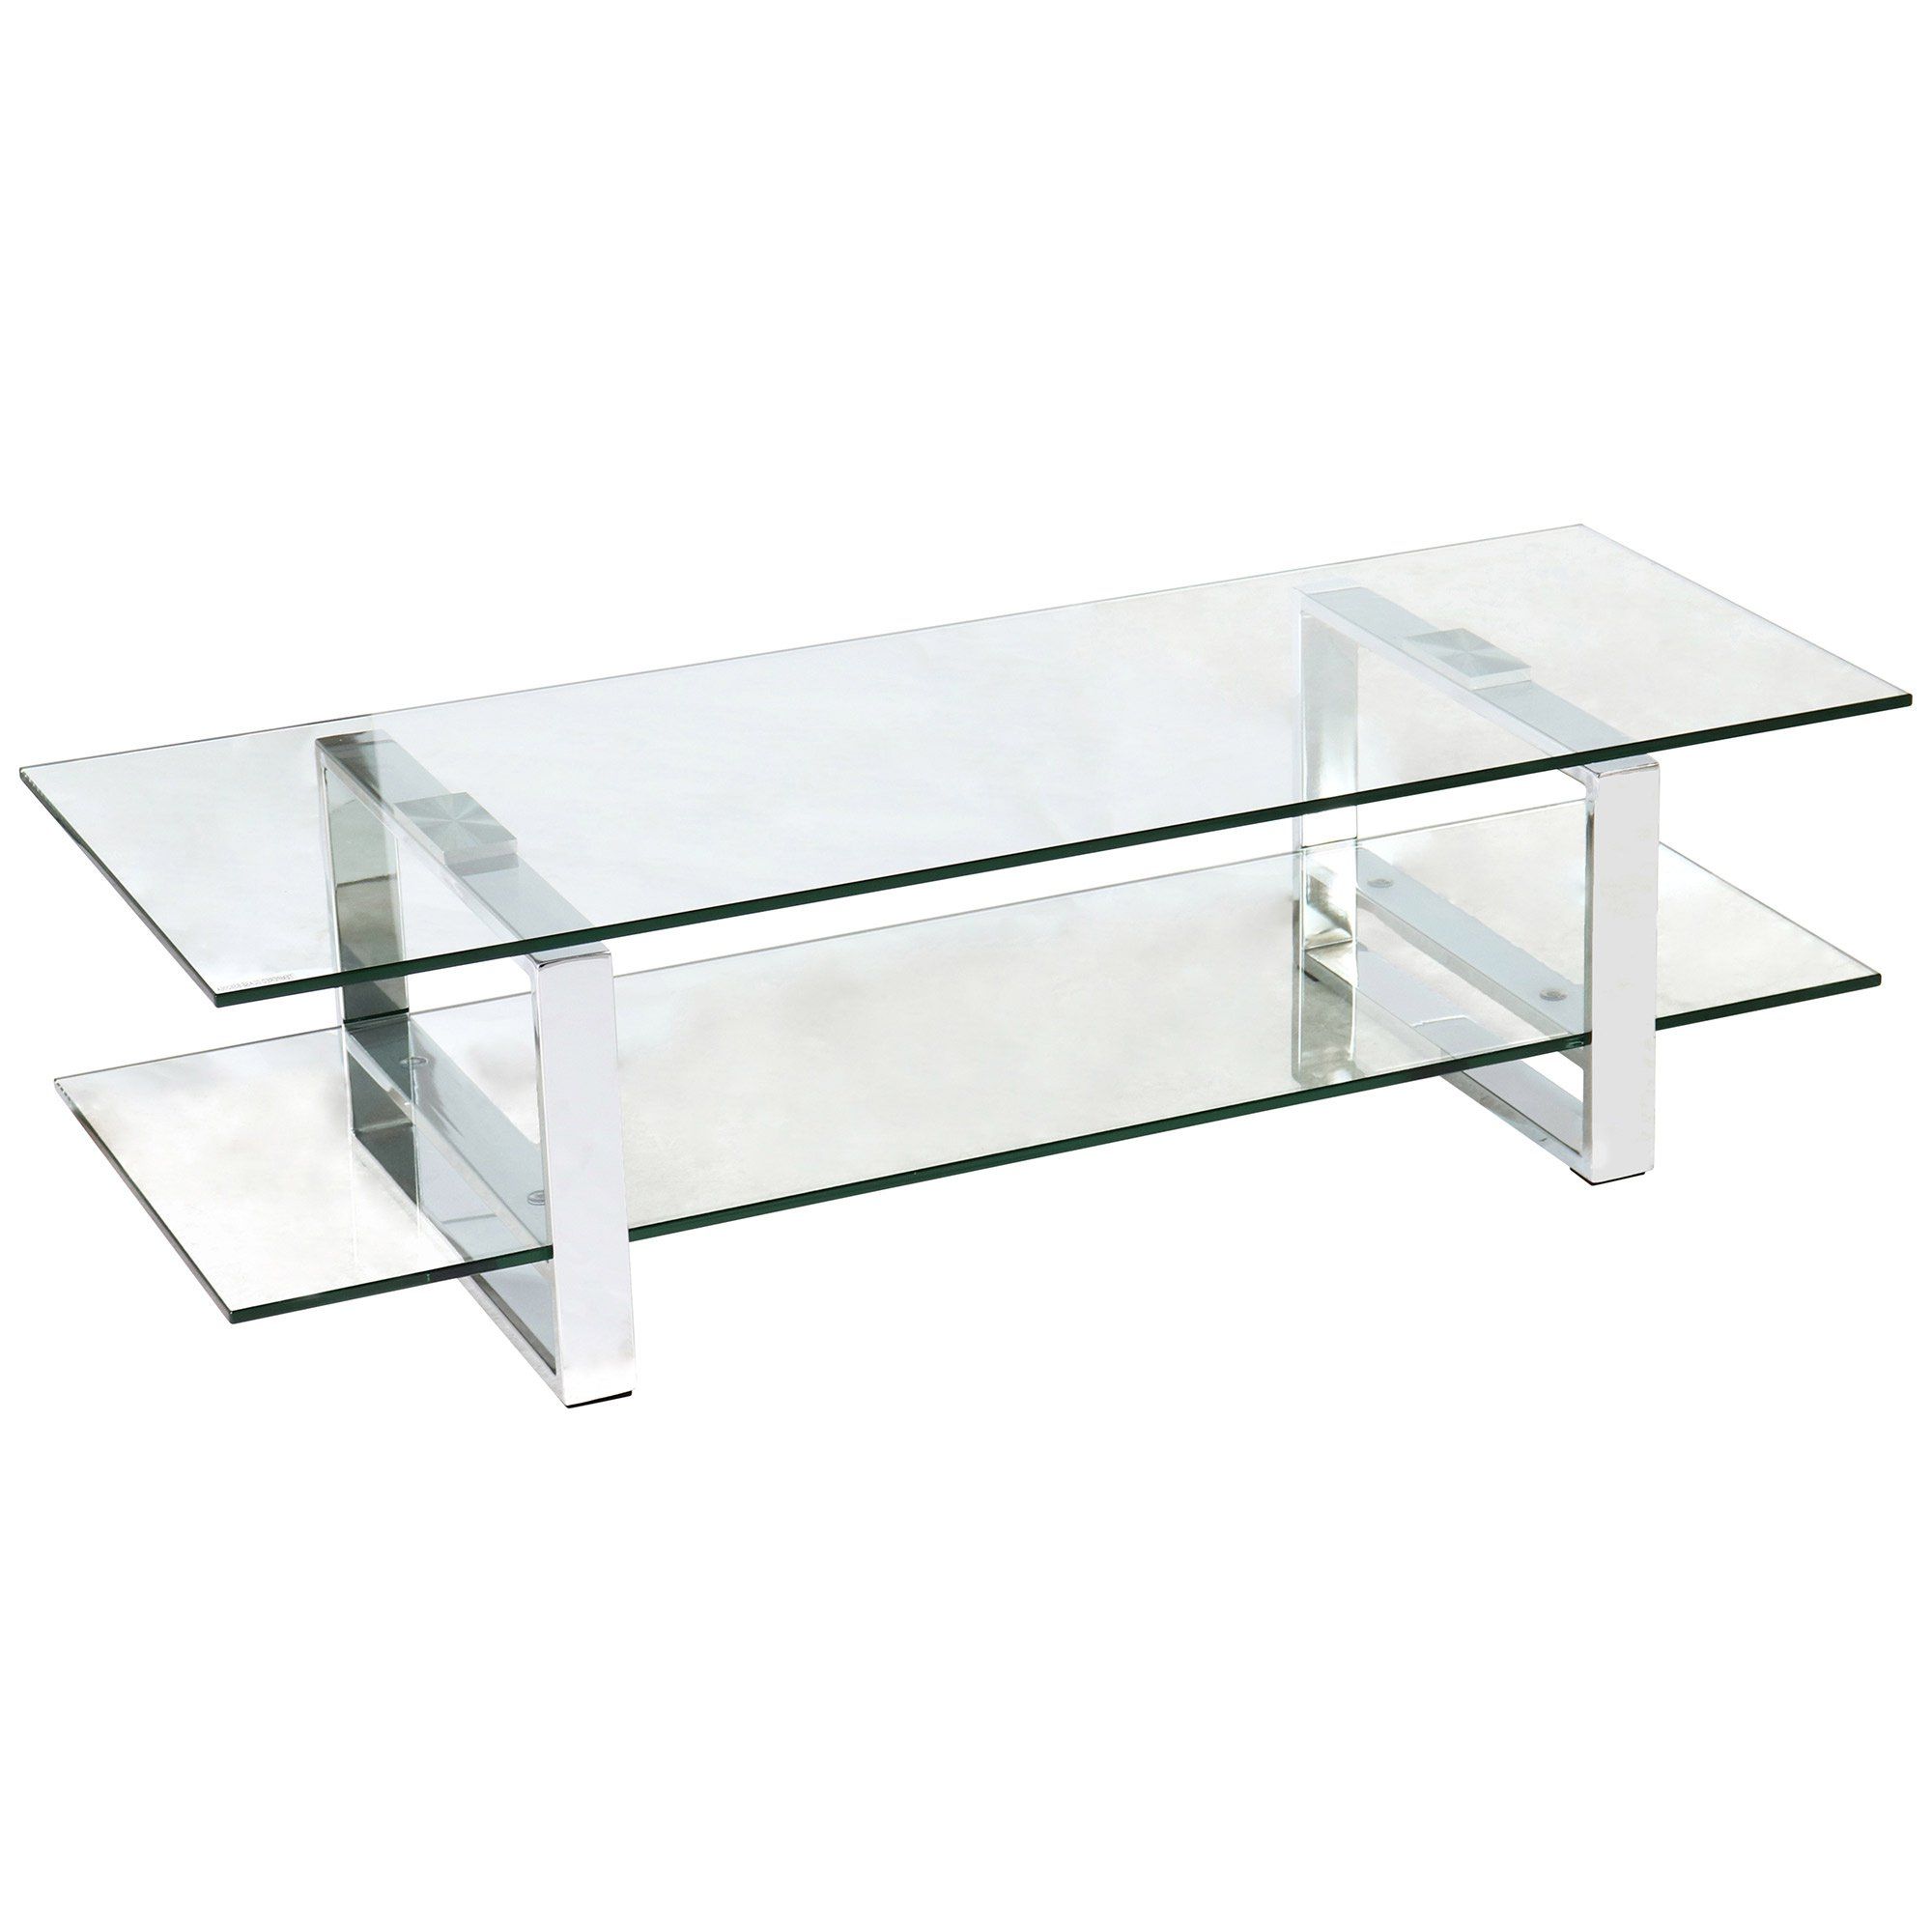 Fashionable Katrine Clear Glass Tv Unit With Chrome Legs Intended For Chrome Tv Stands (View 1 of 10)